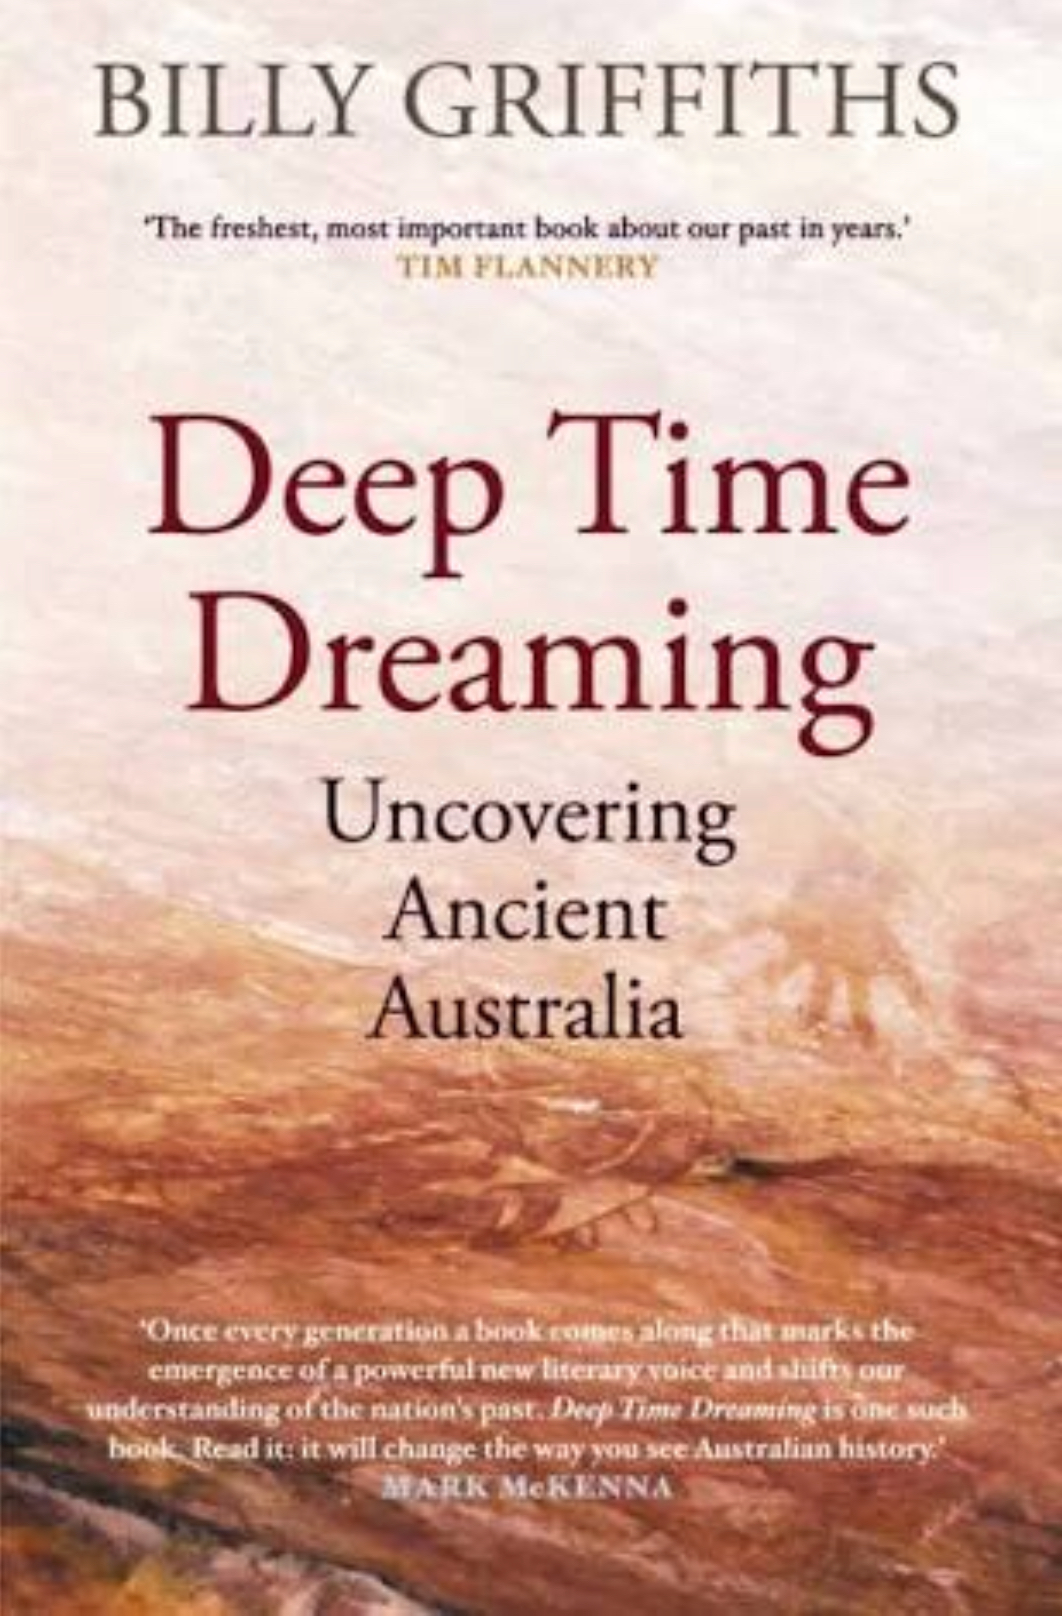 Review_Deep Time Dreaming by Billy Griffiths